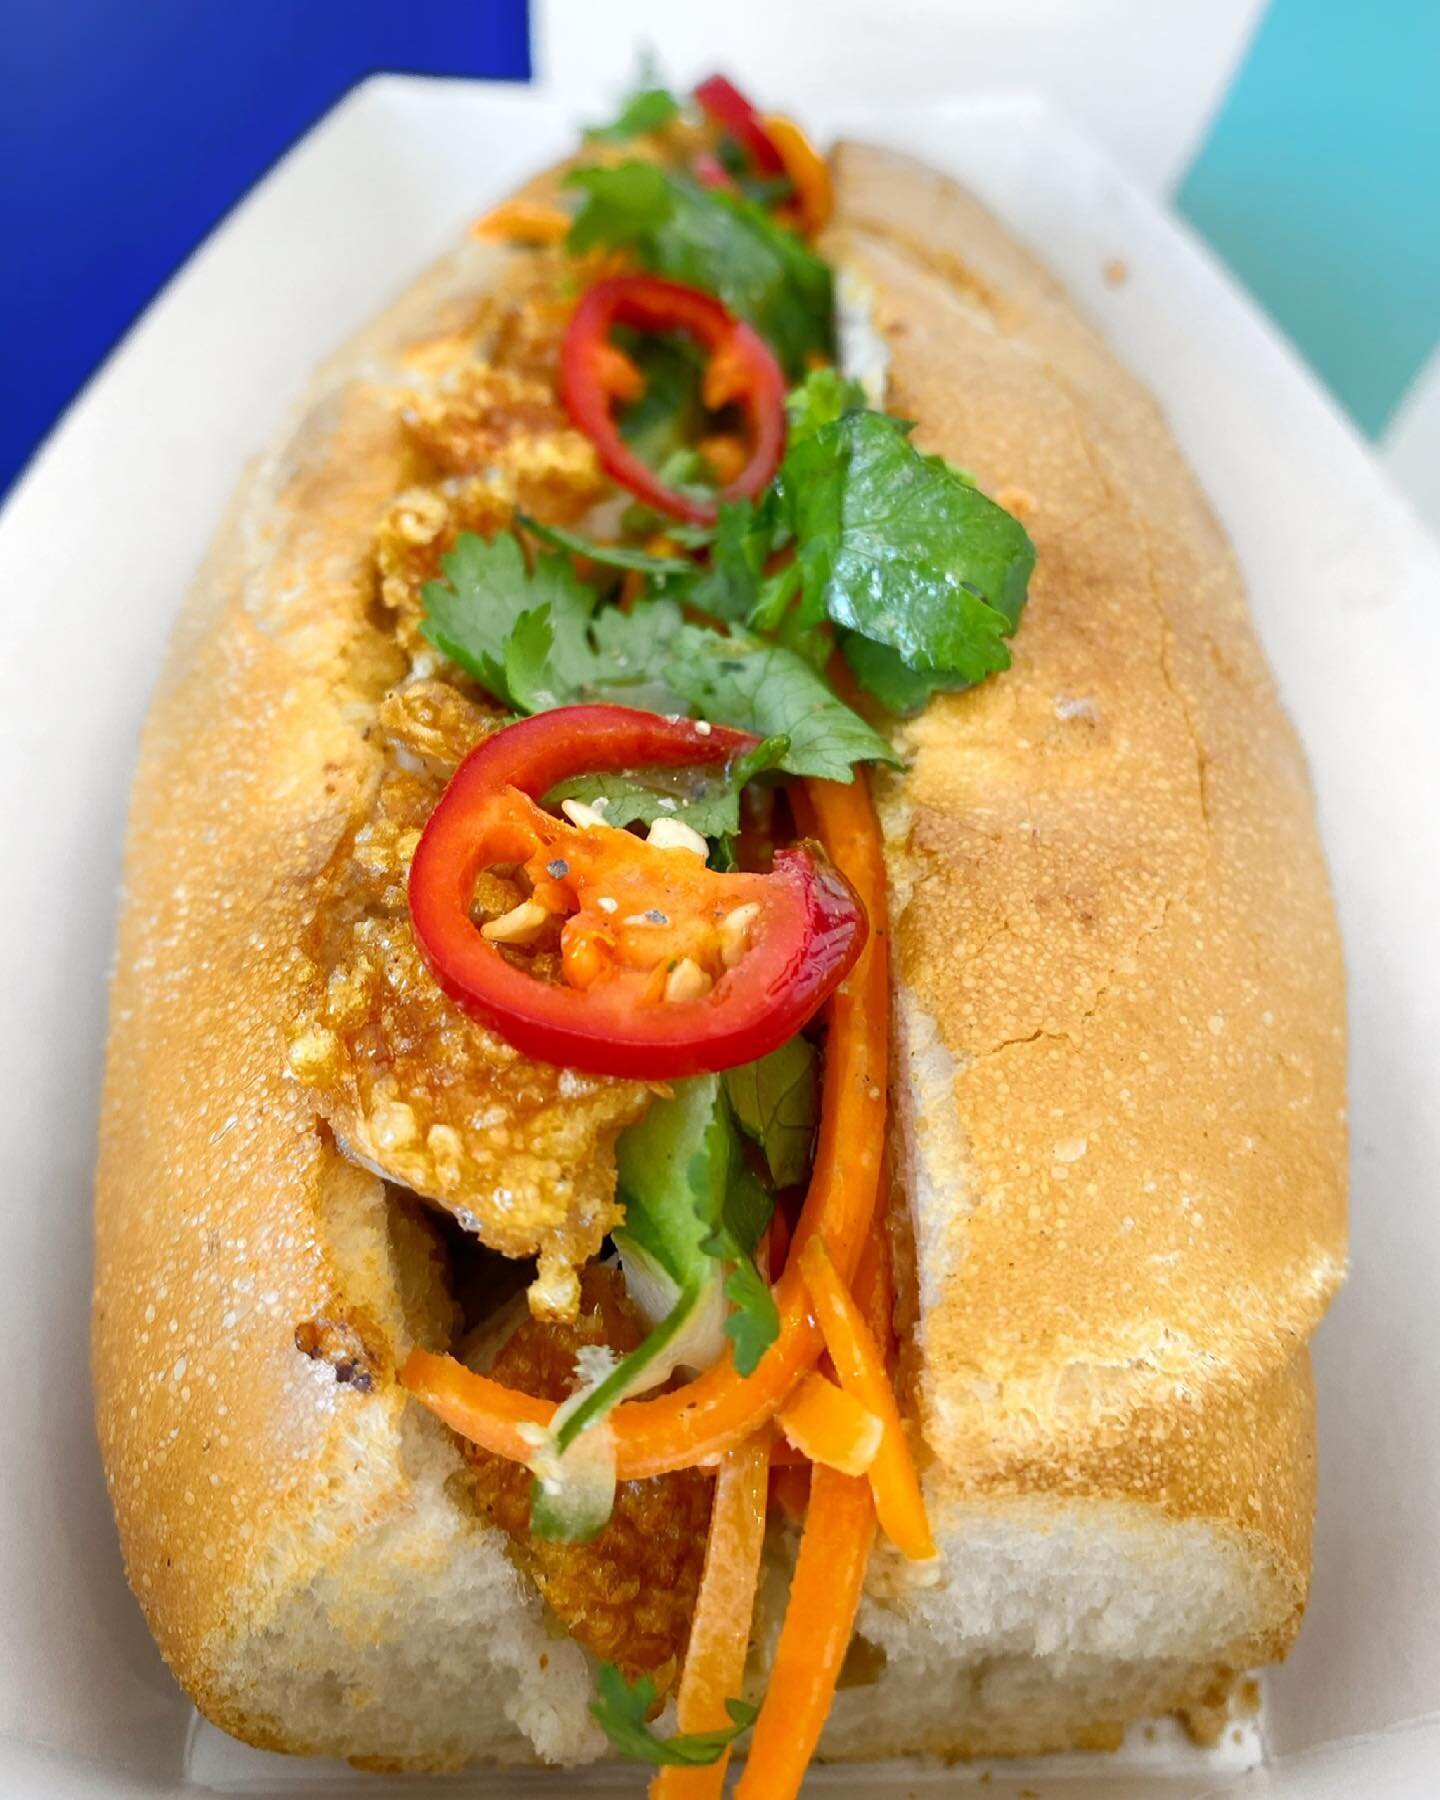 March 4th is a historical date.

In 1966, an interview in the London Evening Standard, The Beatles&rsquo; John Lennon declares the band is &ldquo;more popular than Jesus now&rdquo;.

In 2021, you decide to treat yourself to a banh mi for lunch today!